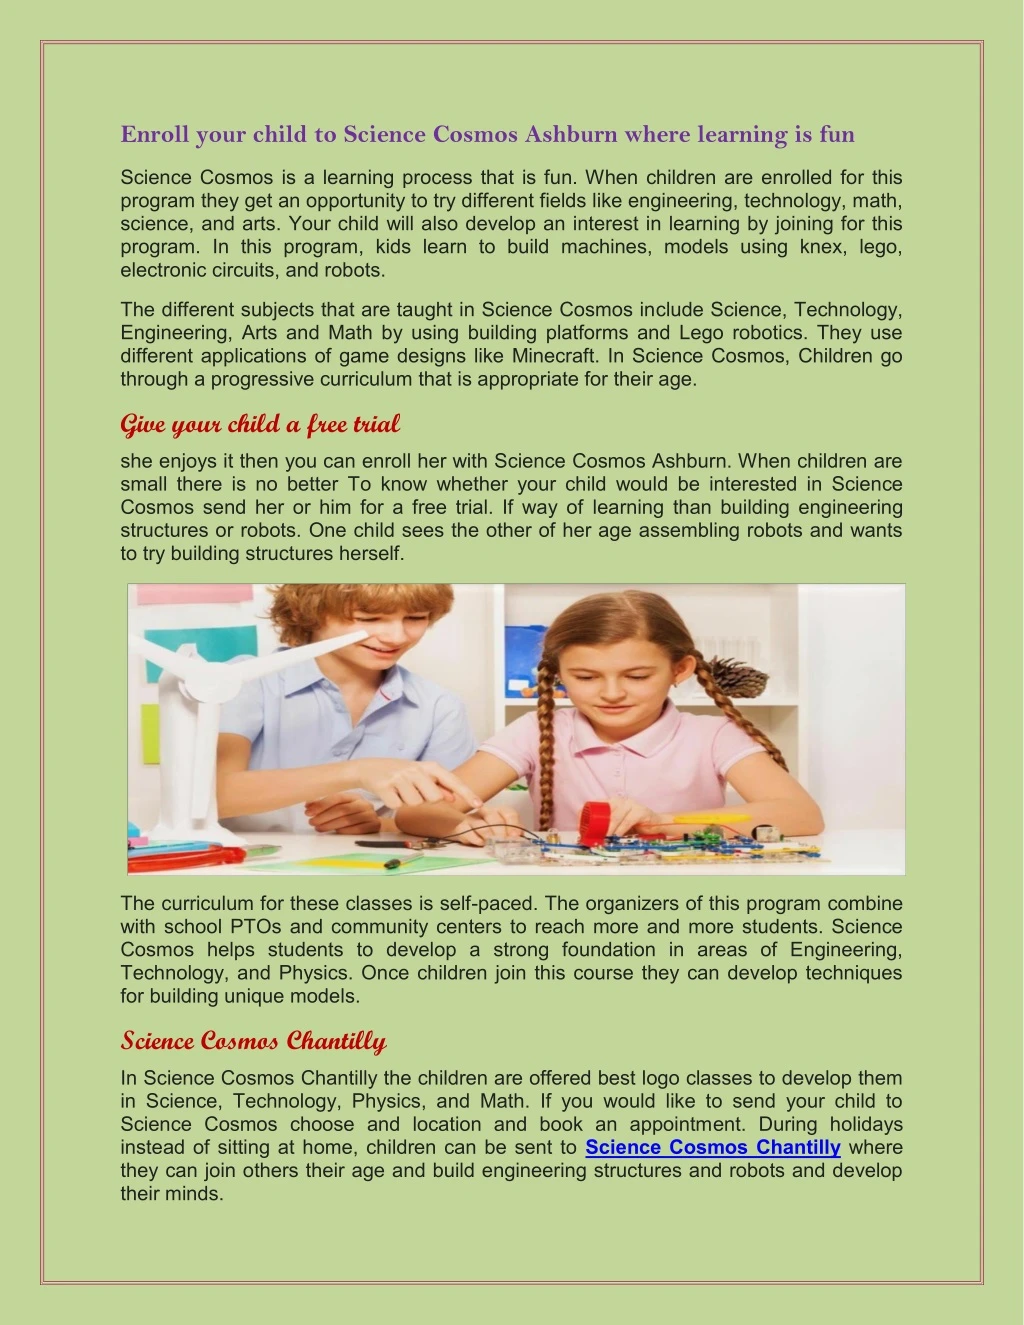 enroll your child to science cosmos ashburn where